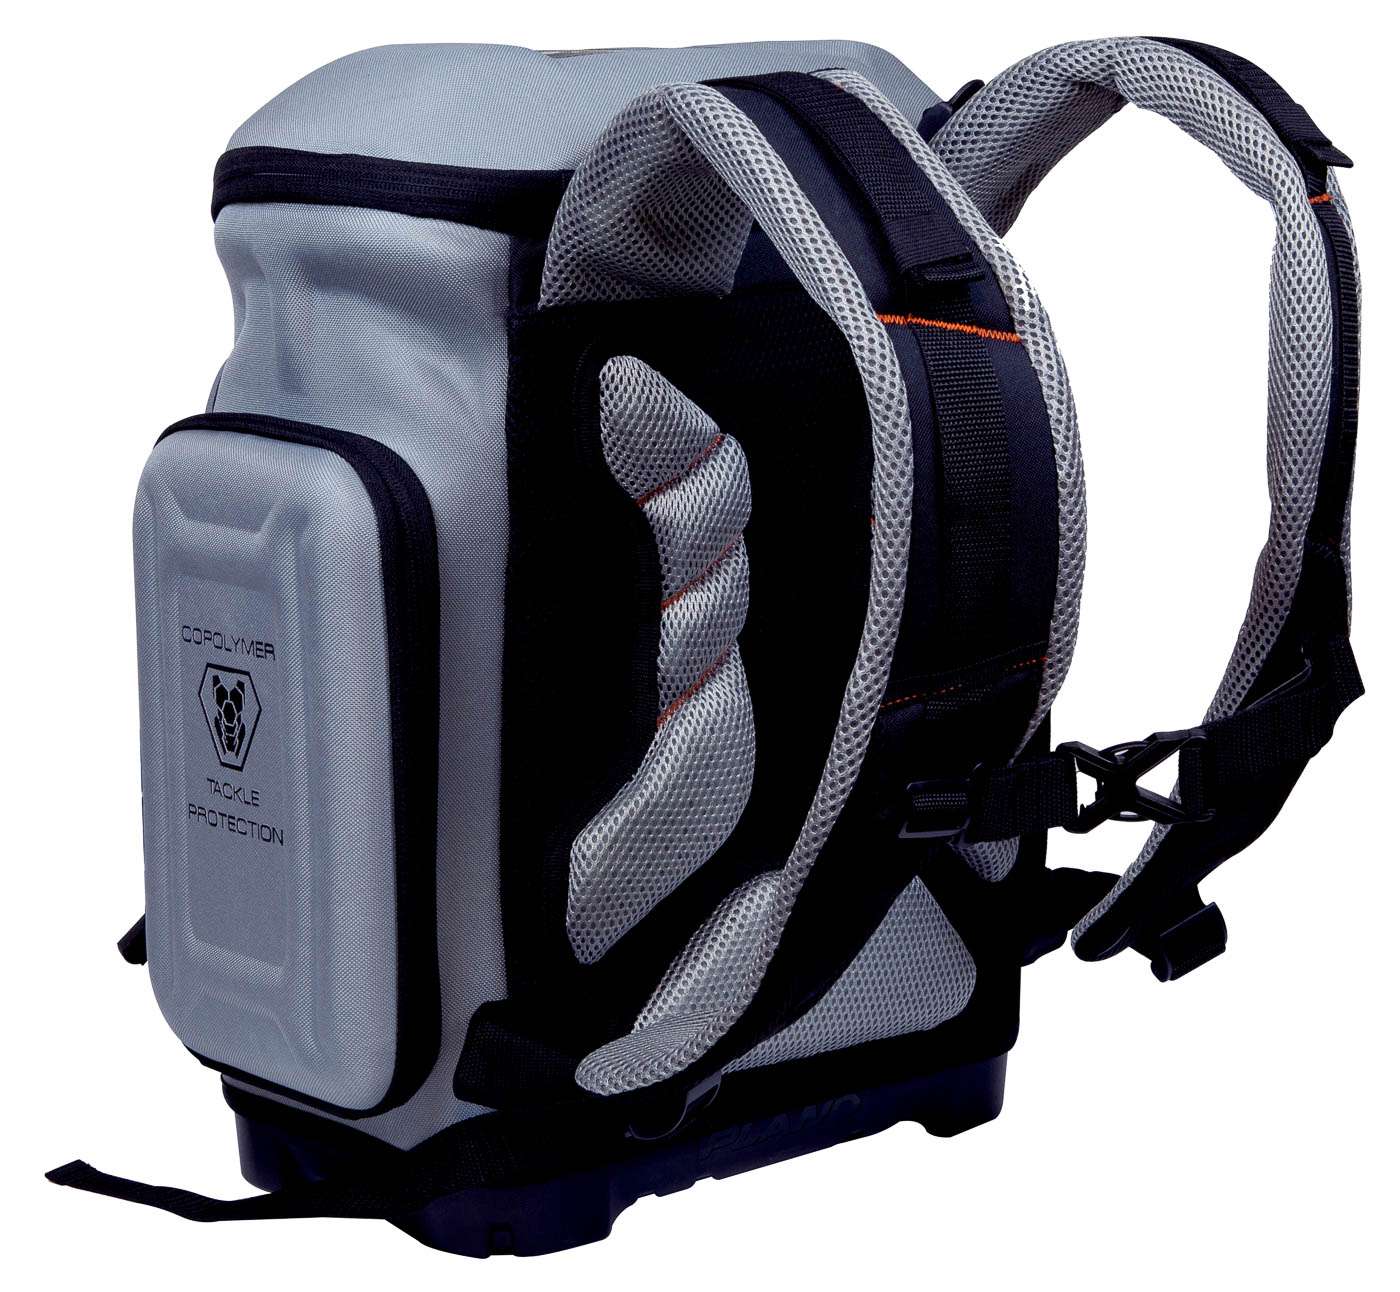 <p><strong>Plano Atlas Tackle Pack</strong></p><p>The Atlas Tackle Pack is a durable tackle-carrying solution that combines the strength of a hard-sided tacklebox, with the lightweight portability of a soft-sided tackle bag. The body of the pack is surrounded by durable EVA panels for foundation and protection, which allows the pack to stand up and keep form. At the top is a patented, magnetic Dropzoone, allowing quick access to tools and lures by keeping them in place with magnets. A bungee-cord rod holder, tool holders and a water-resistant cell phone storage add versatility. Includes three Plano 3700 StowAway utility boxes. <a href=